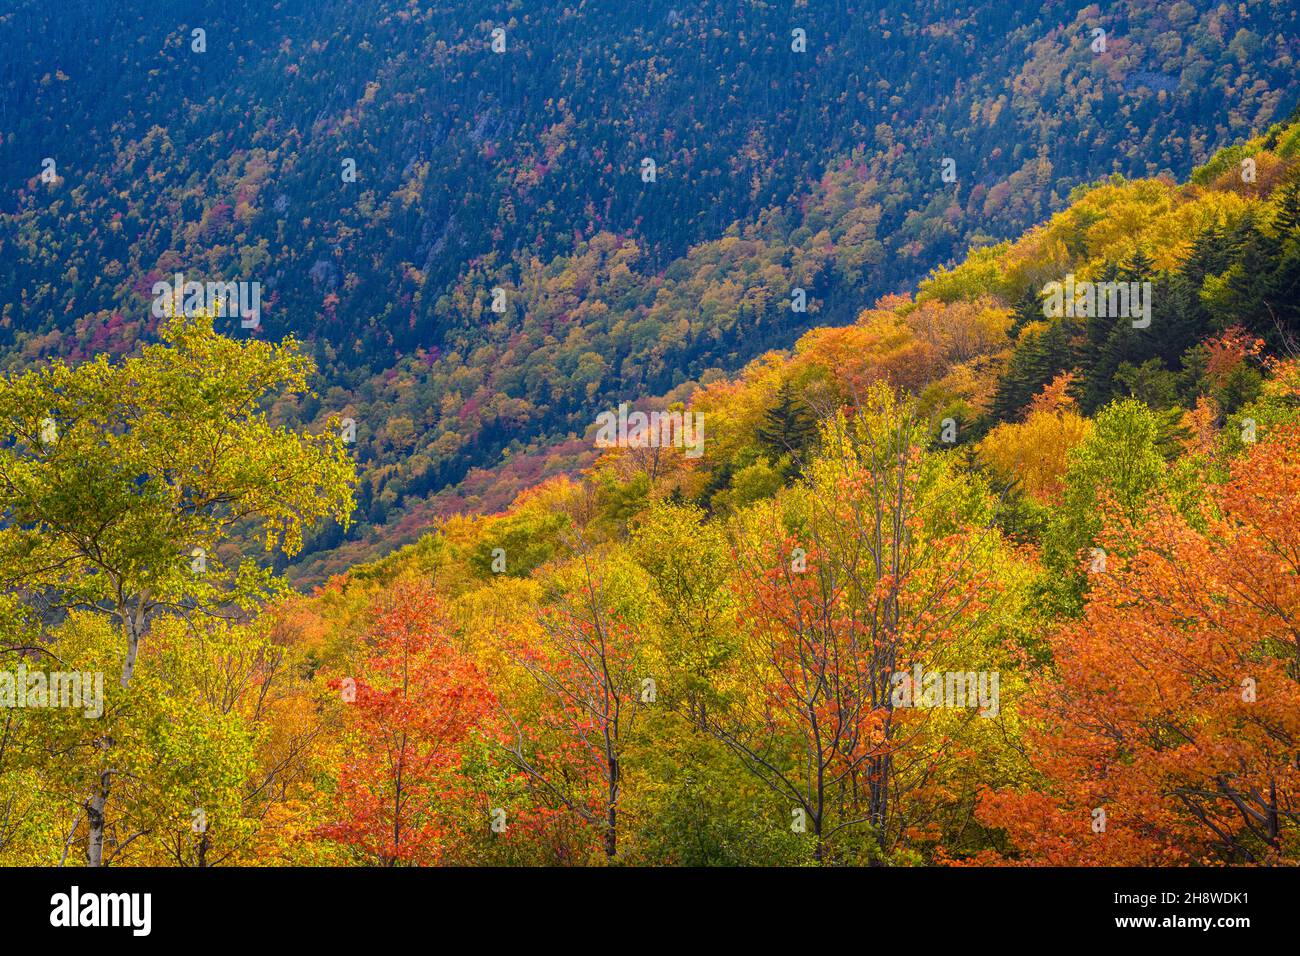 Autumn foliage in the deciduous forest on New England hillsides, Crawford Notch State Park, Hart's Location, New Hampshire, USA Stock Photo